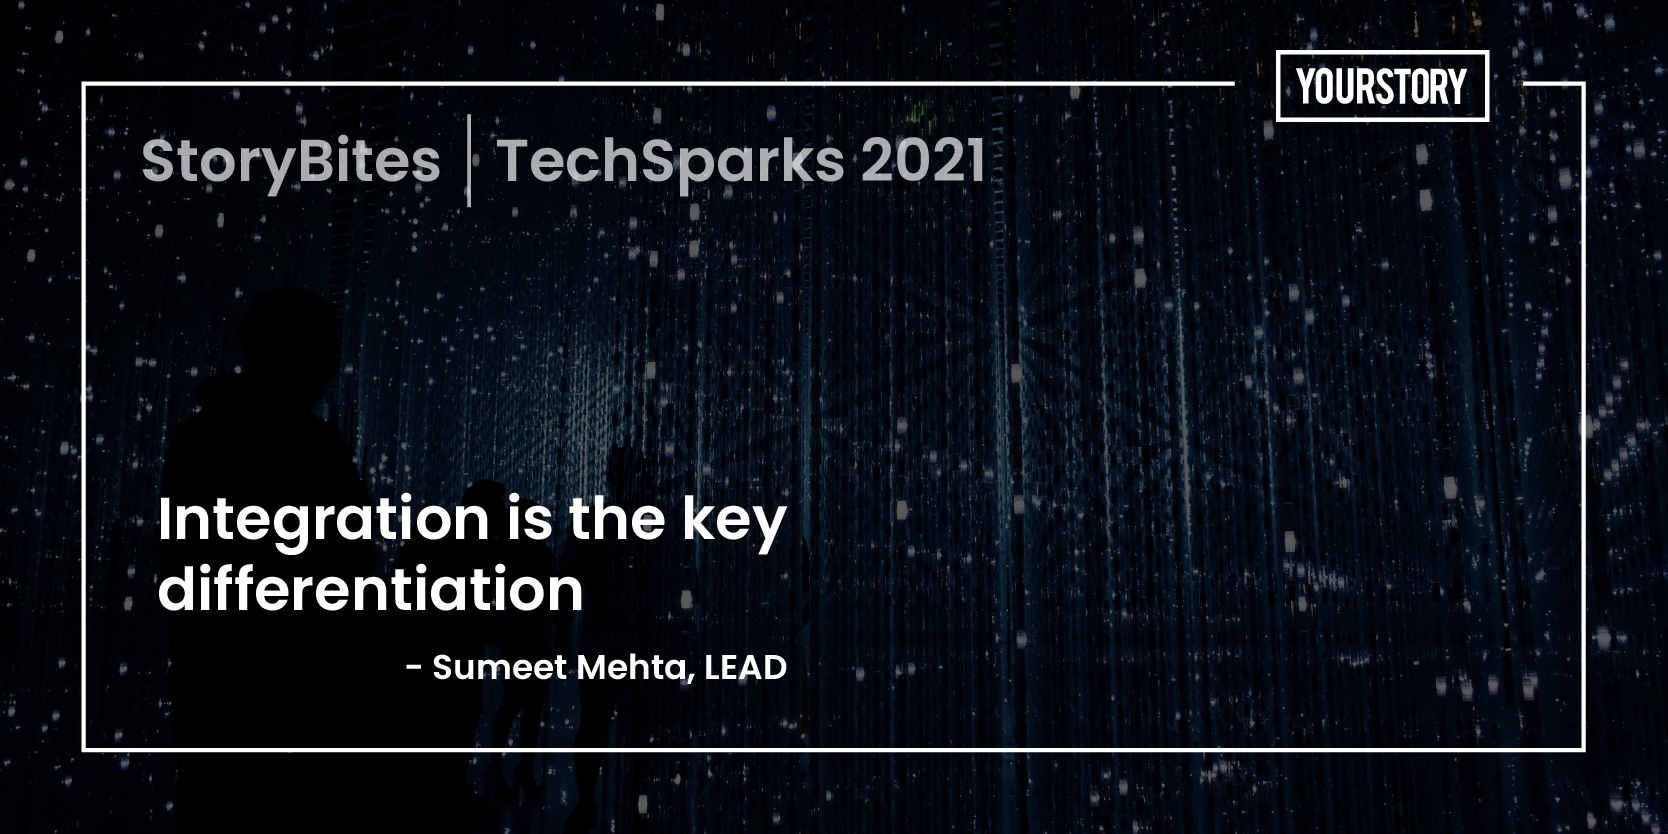 ‘Integration is the key differentiation’ – 30 quotes on digital transformation from TechSparks 2021